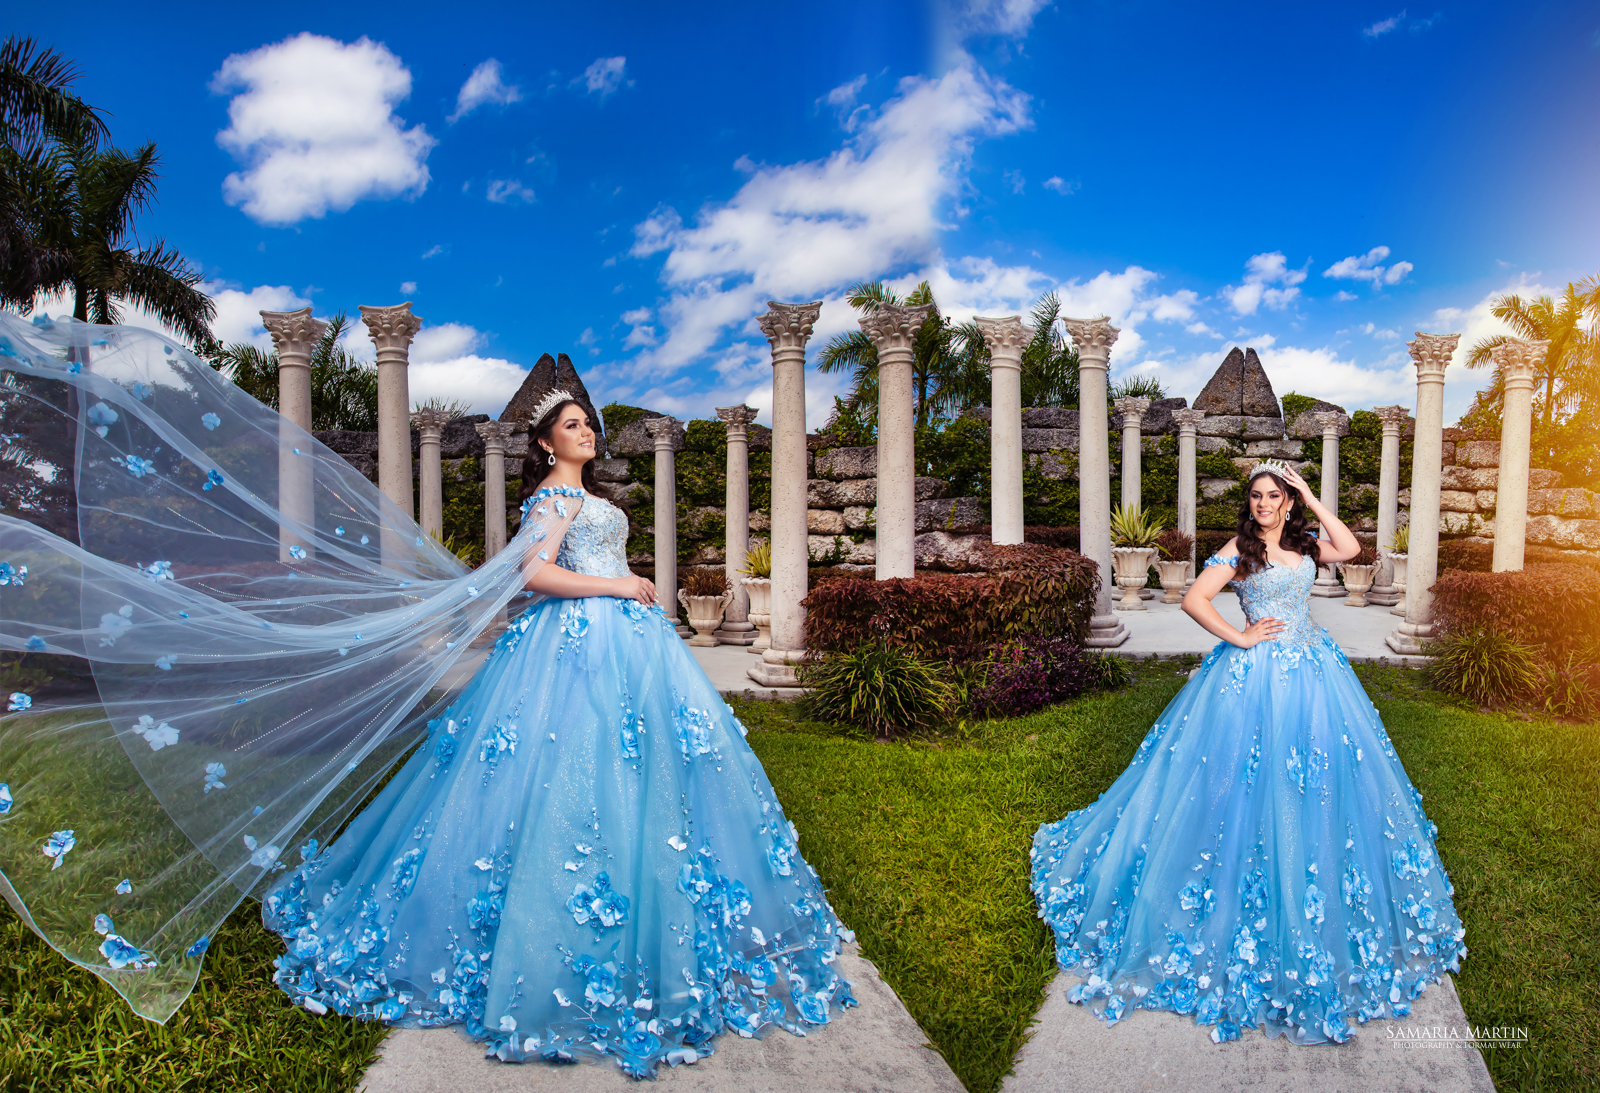 Photo shoot at villa turquea, blue quince dress, miami dress rental, where to rent a gown